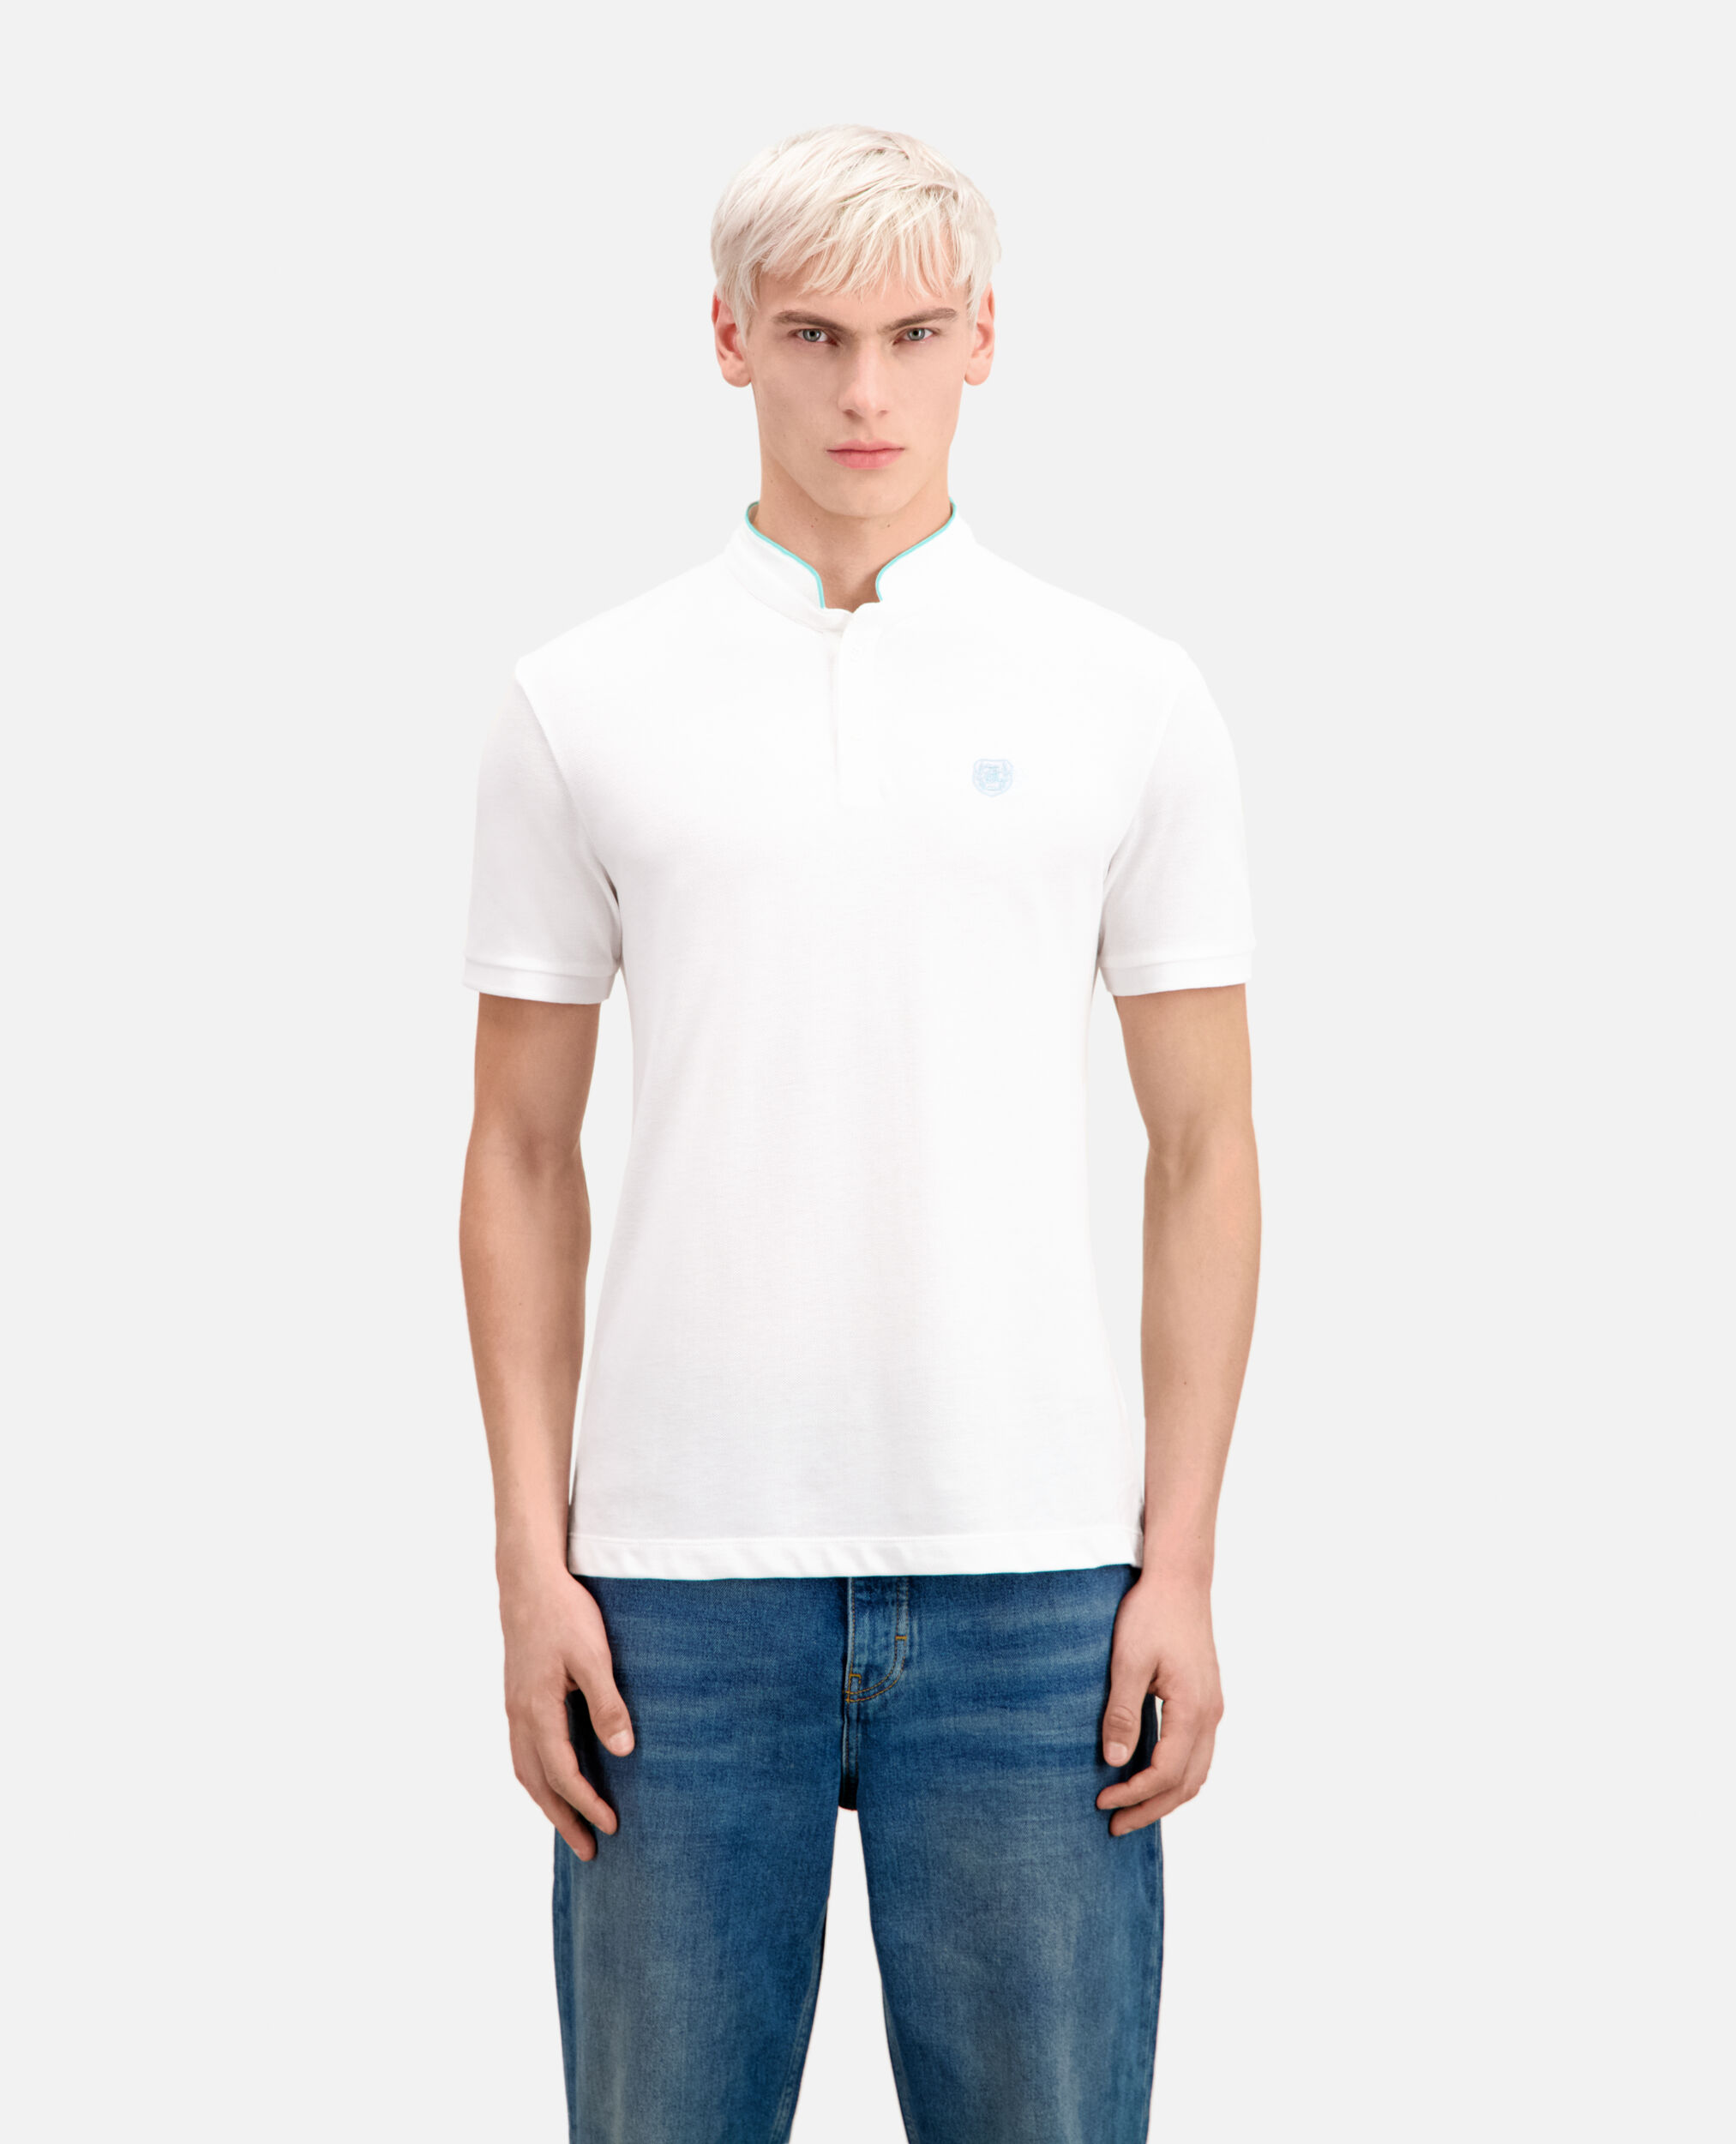 White cotton polo t-shirt, WHITE / DUCK BLUE, hi-res image number null